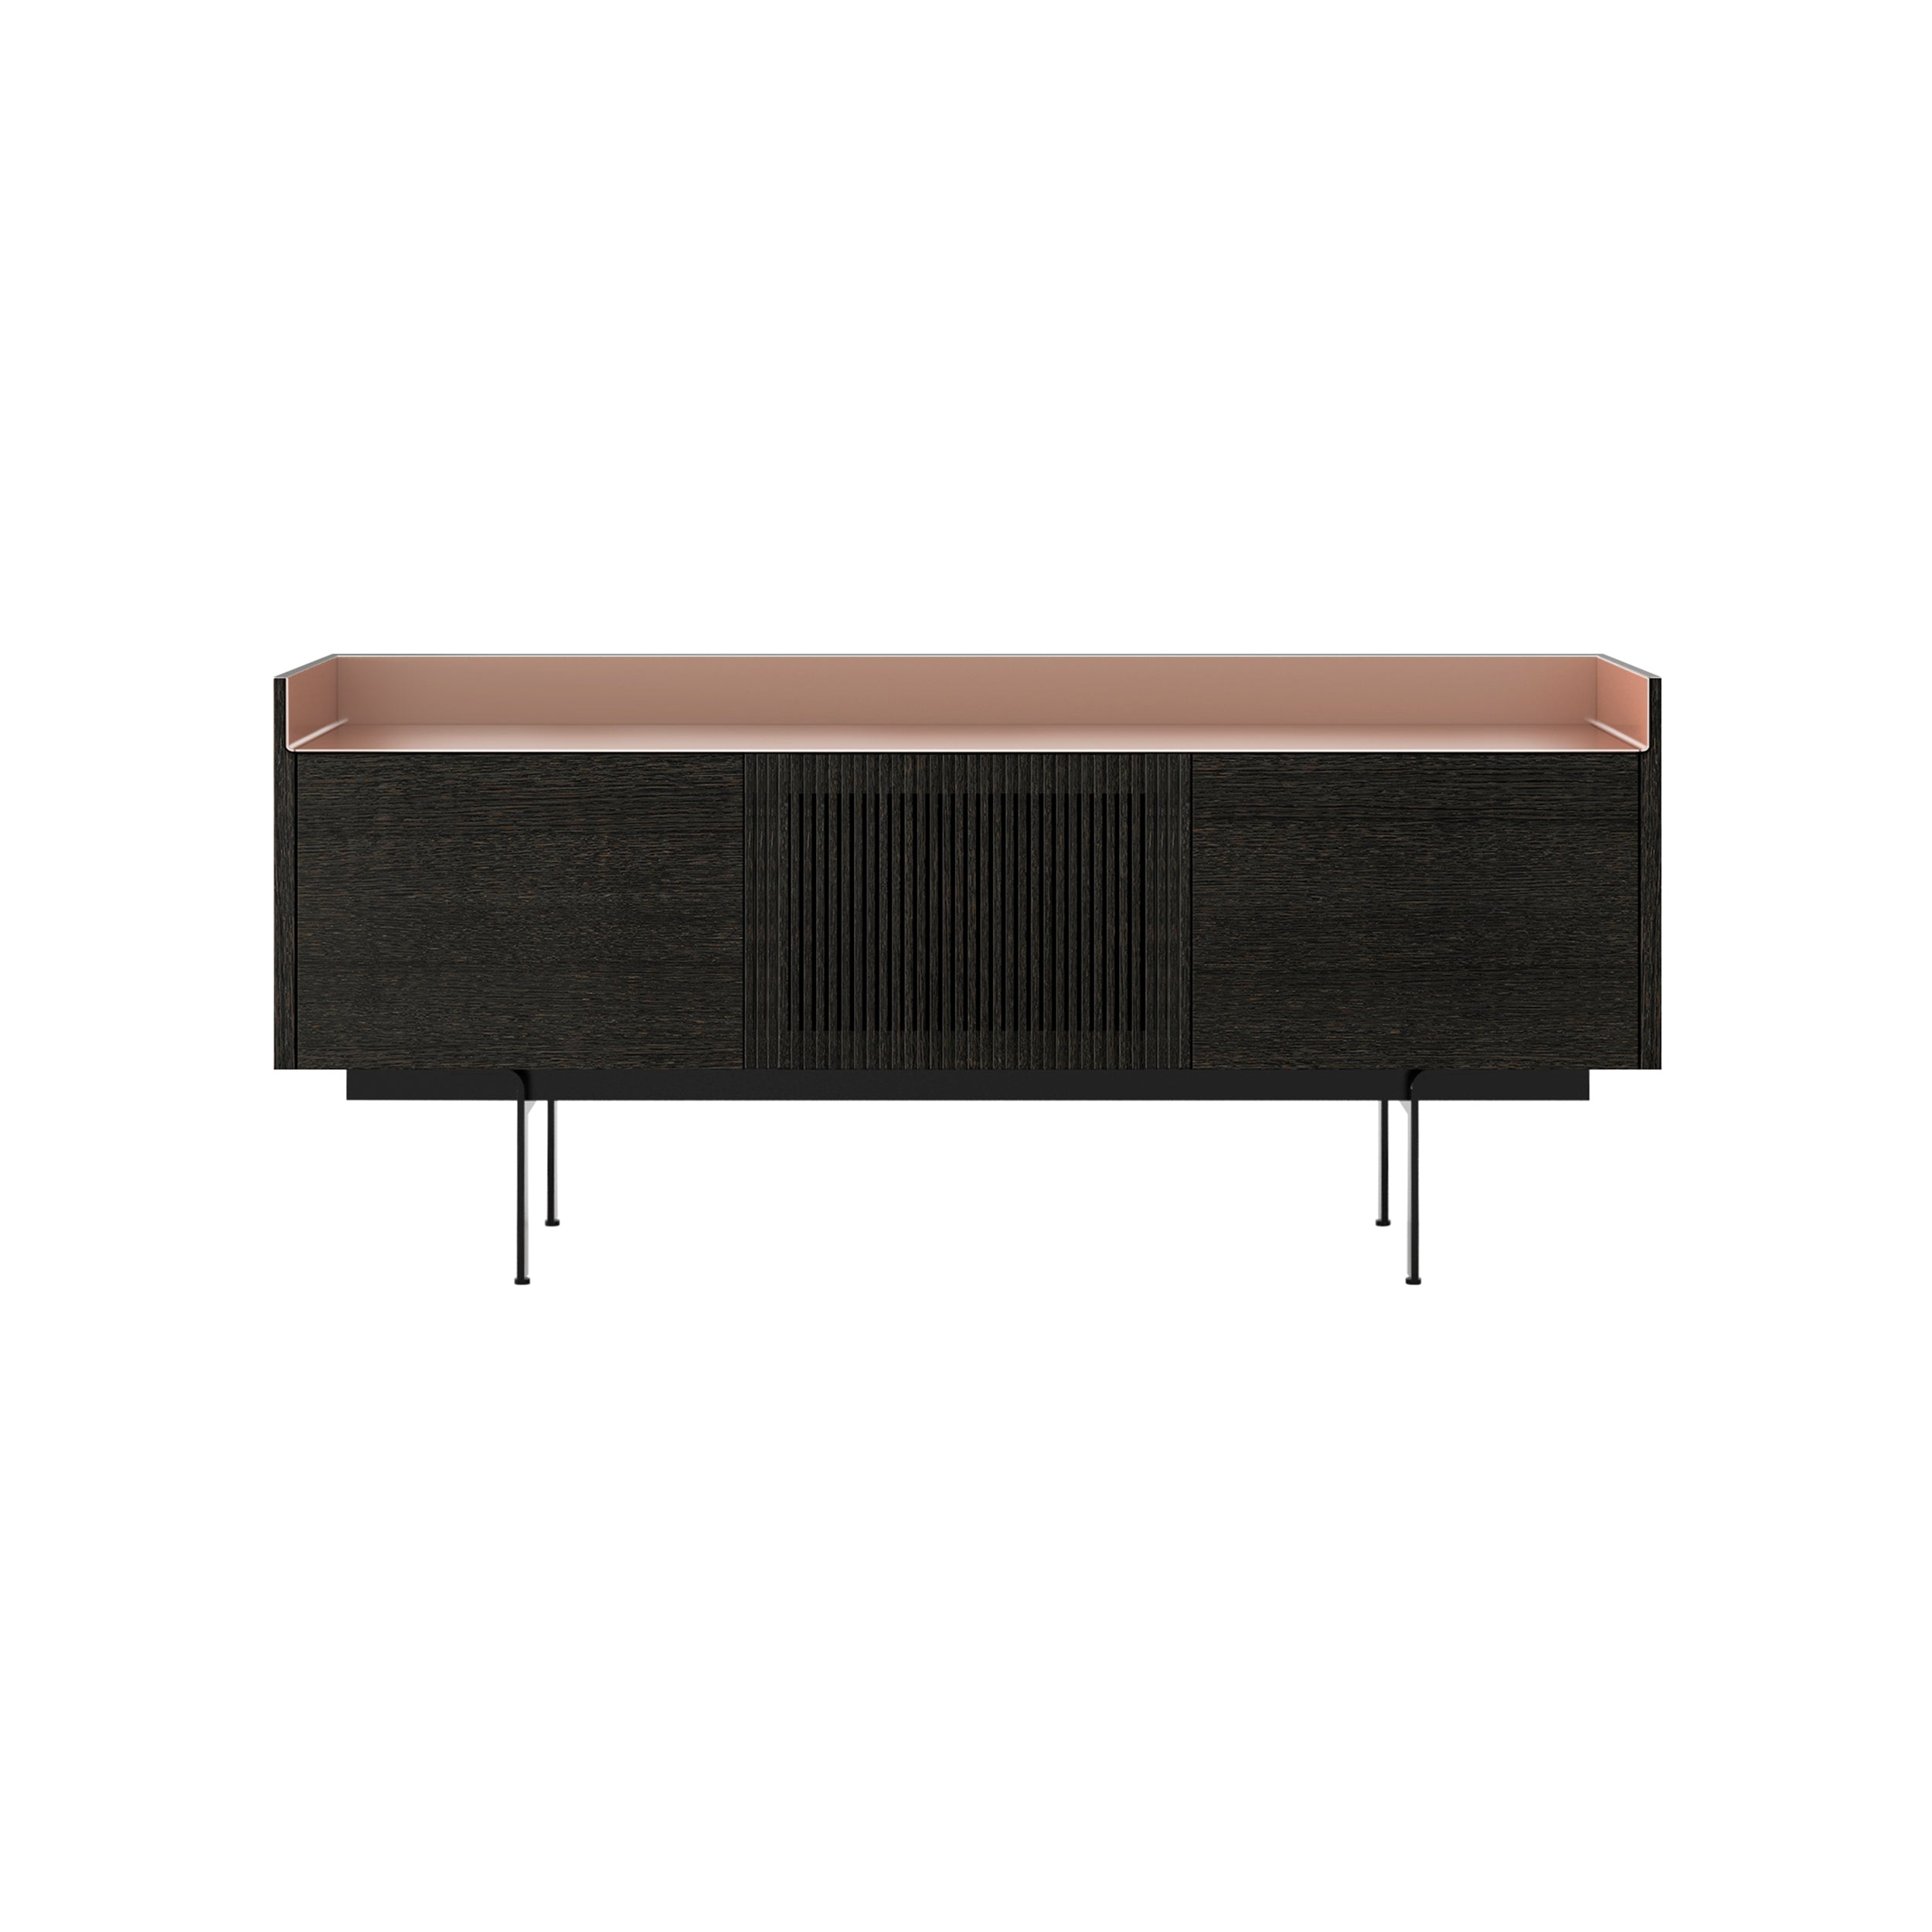 Stockholm Technic Sideboard: STH303 + Dark Grey Stained Oak + Anodized Aluminum Pale Rose + Black